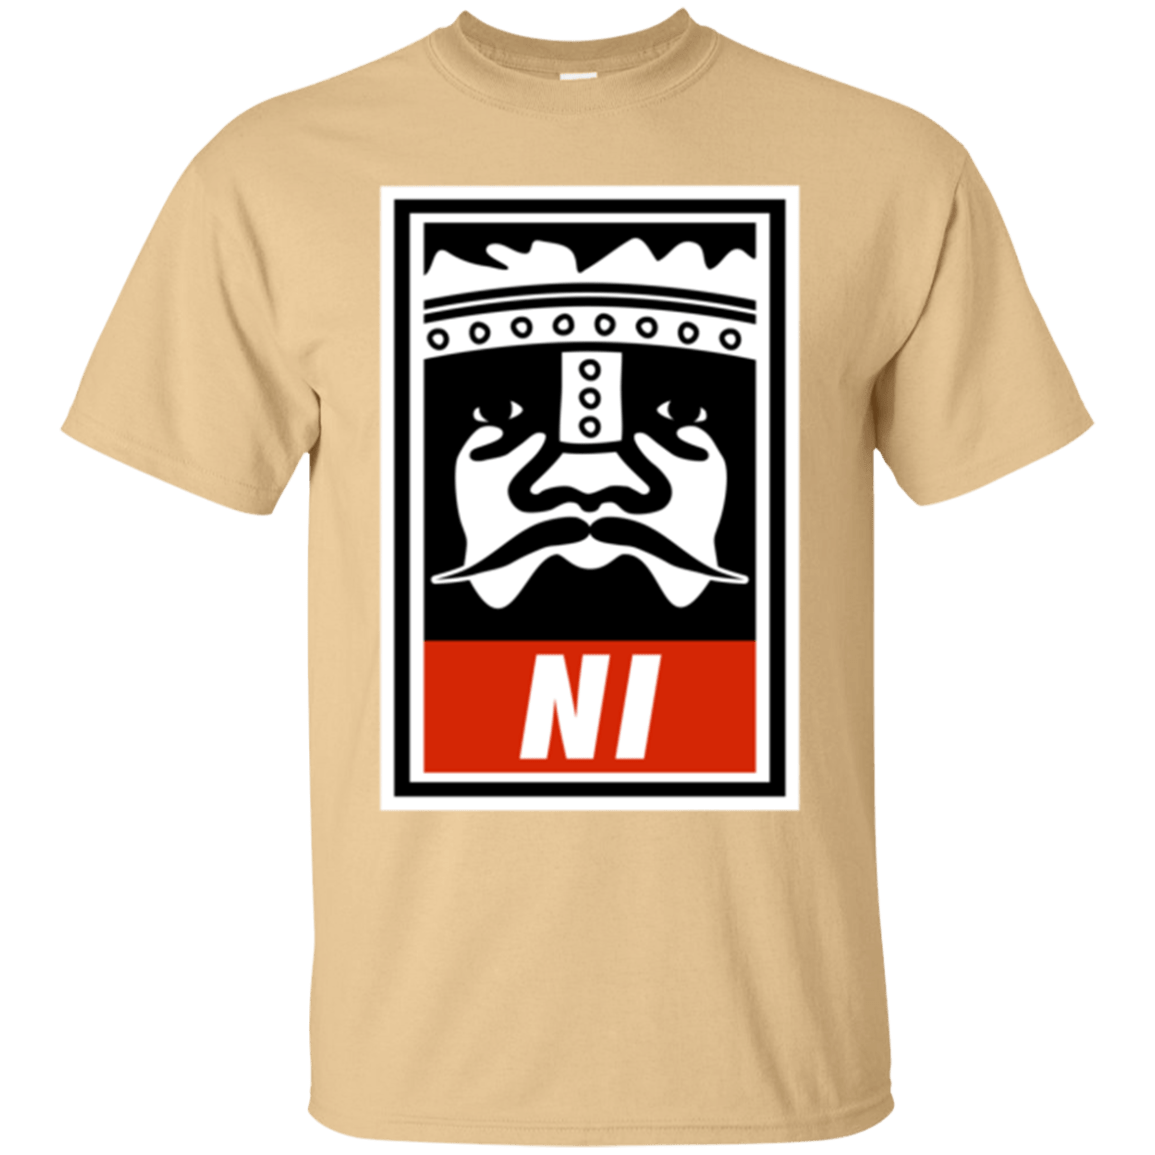 Niid to Obey T-Shirt